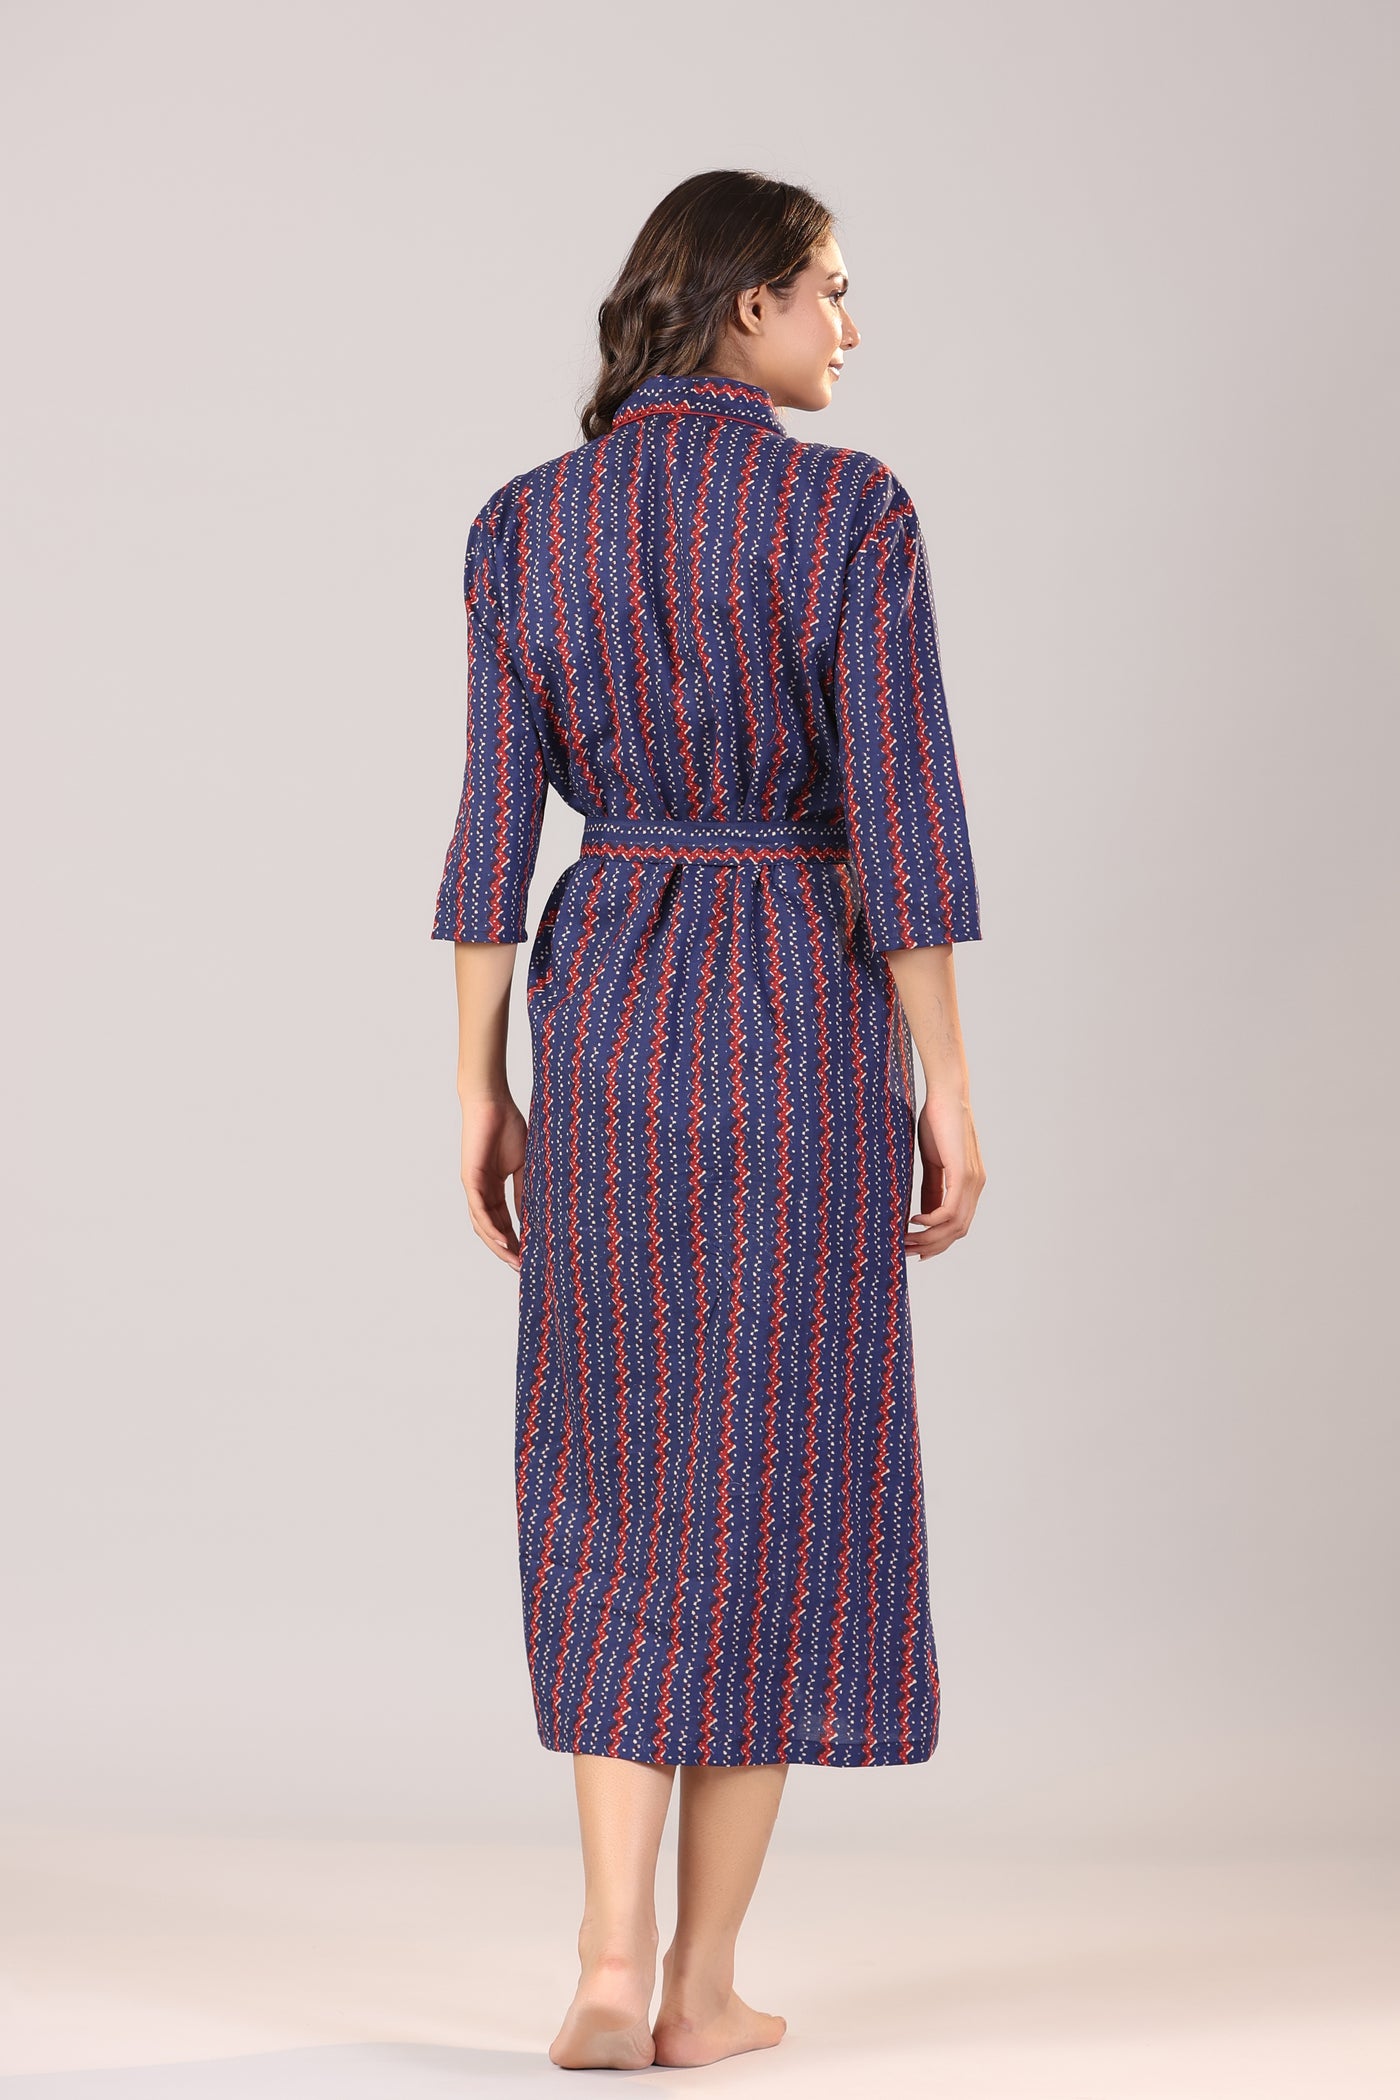 Parallel Zigzag on Blue Cotton Robe